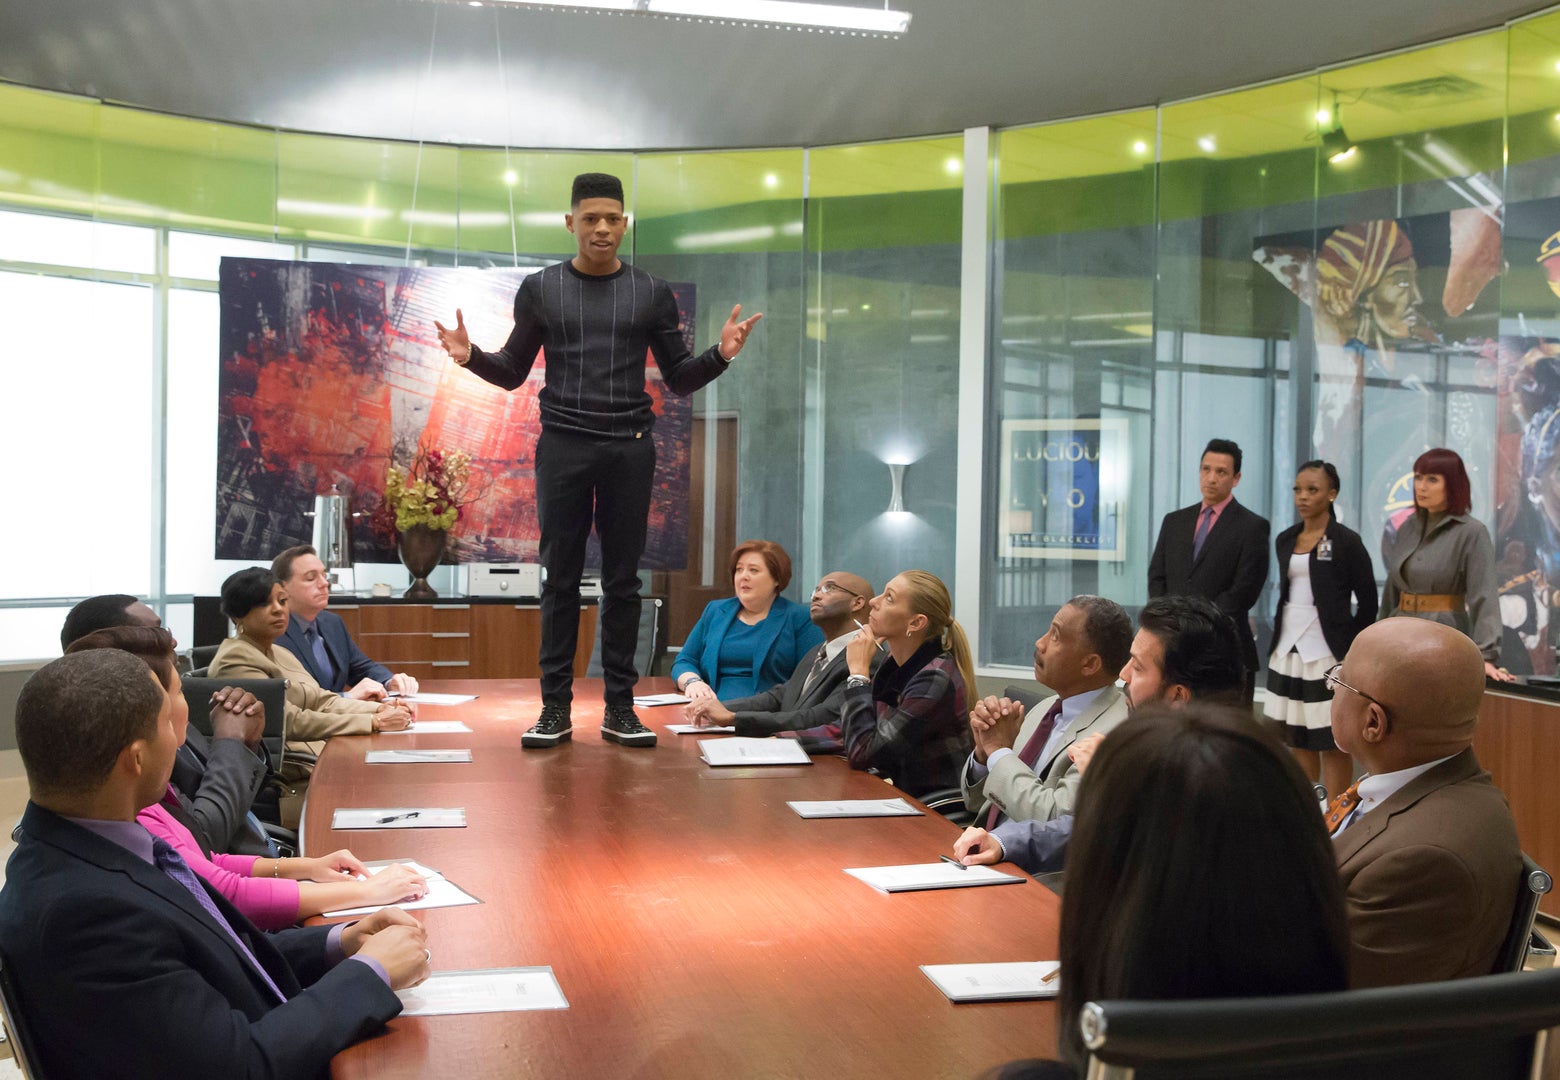 Your First Look at 'Empire's' Midseason Return!
